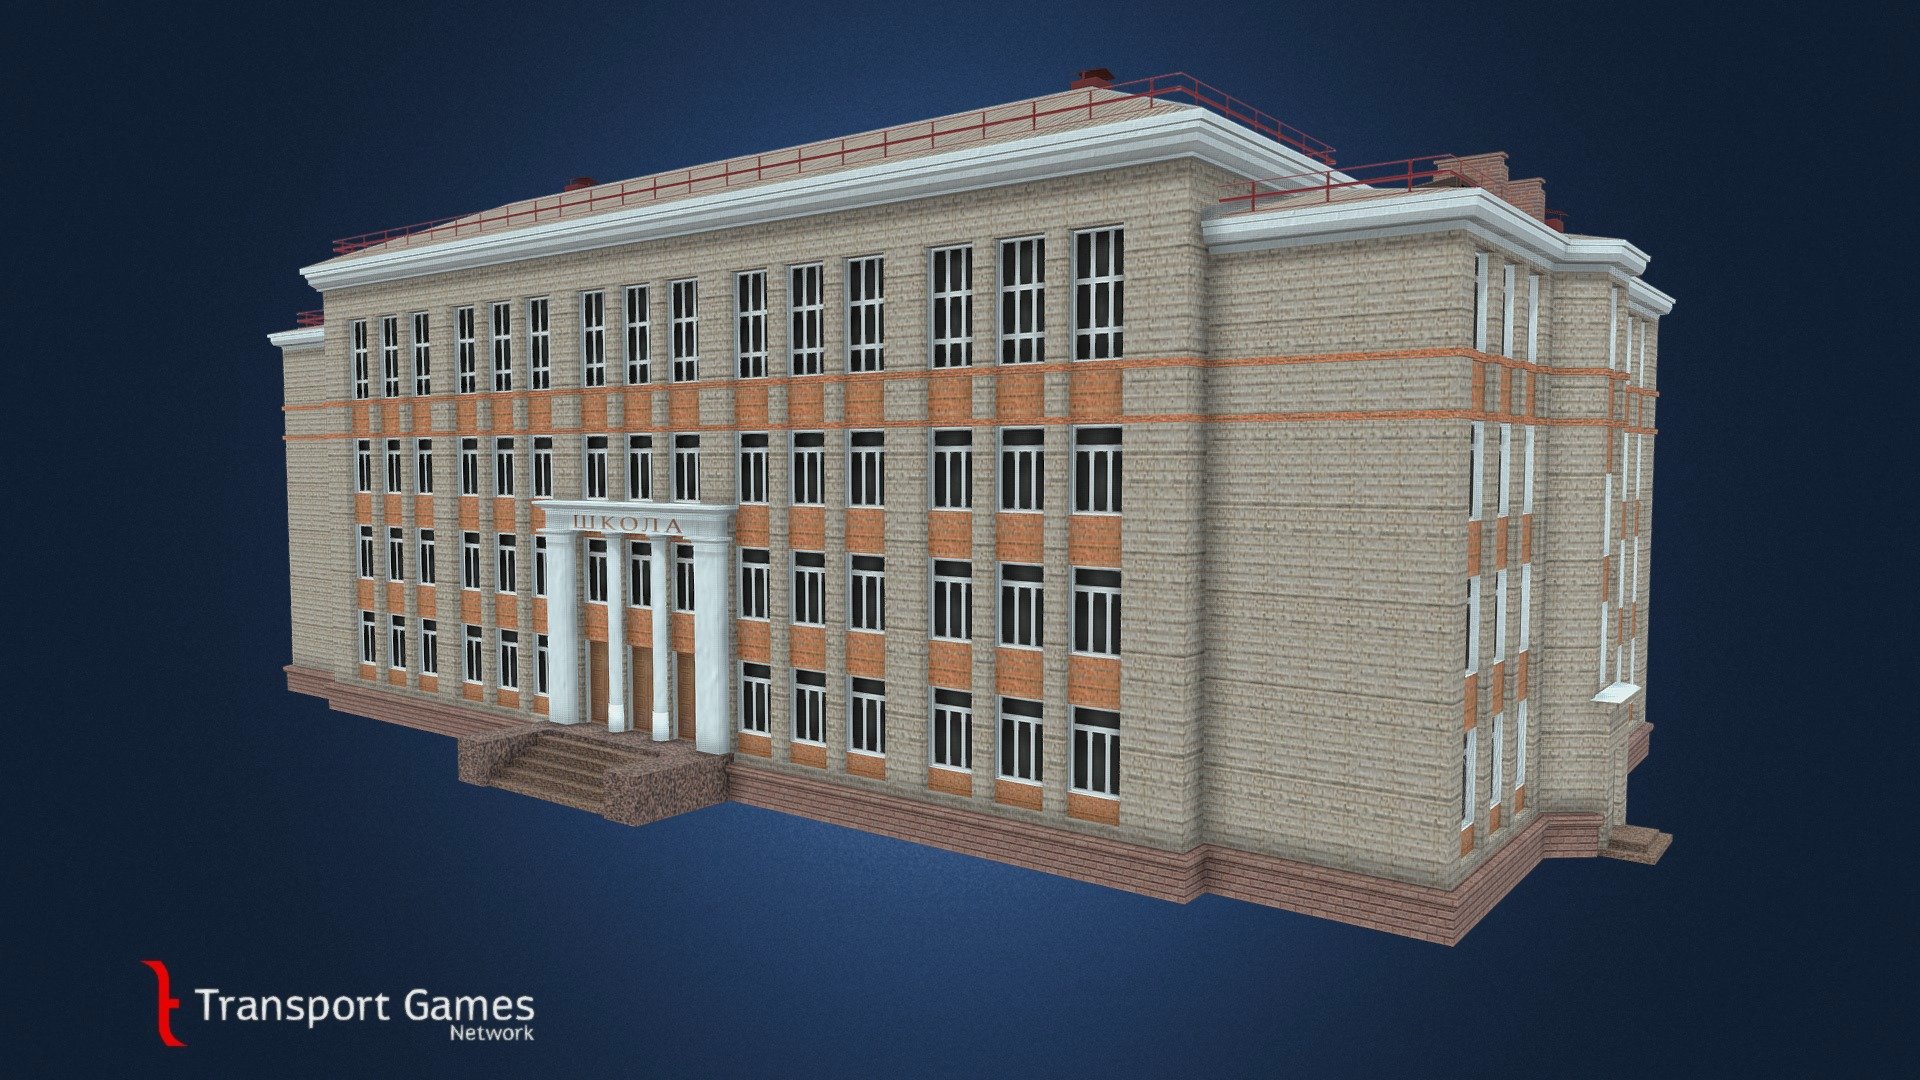 Asset for Citites Skylines.
Series 2-02-27. Brick walls version.
Typical soviet school in middle 20th century.
 - School proj. 2-02-27 (south facade orientation) - 3D model by targa (@targettius) 3d model